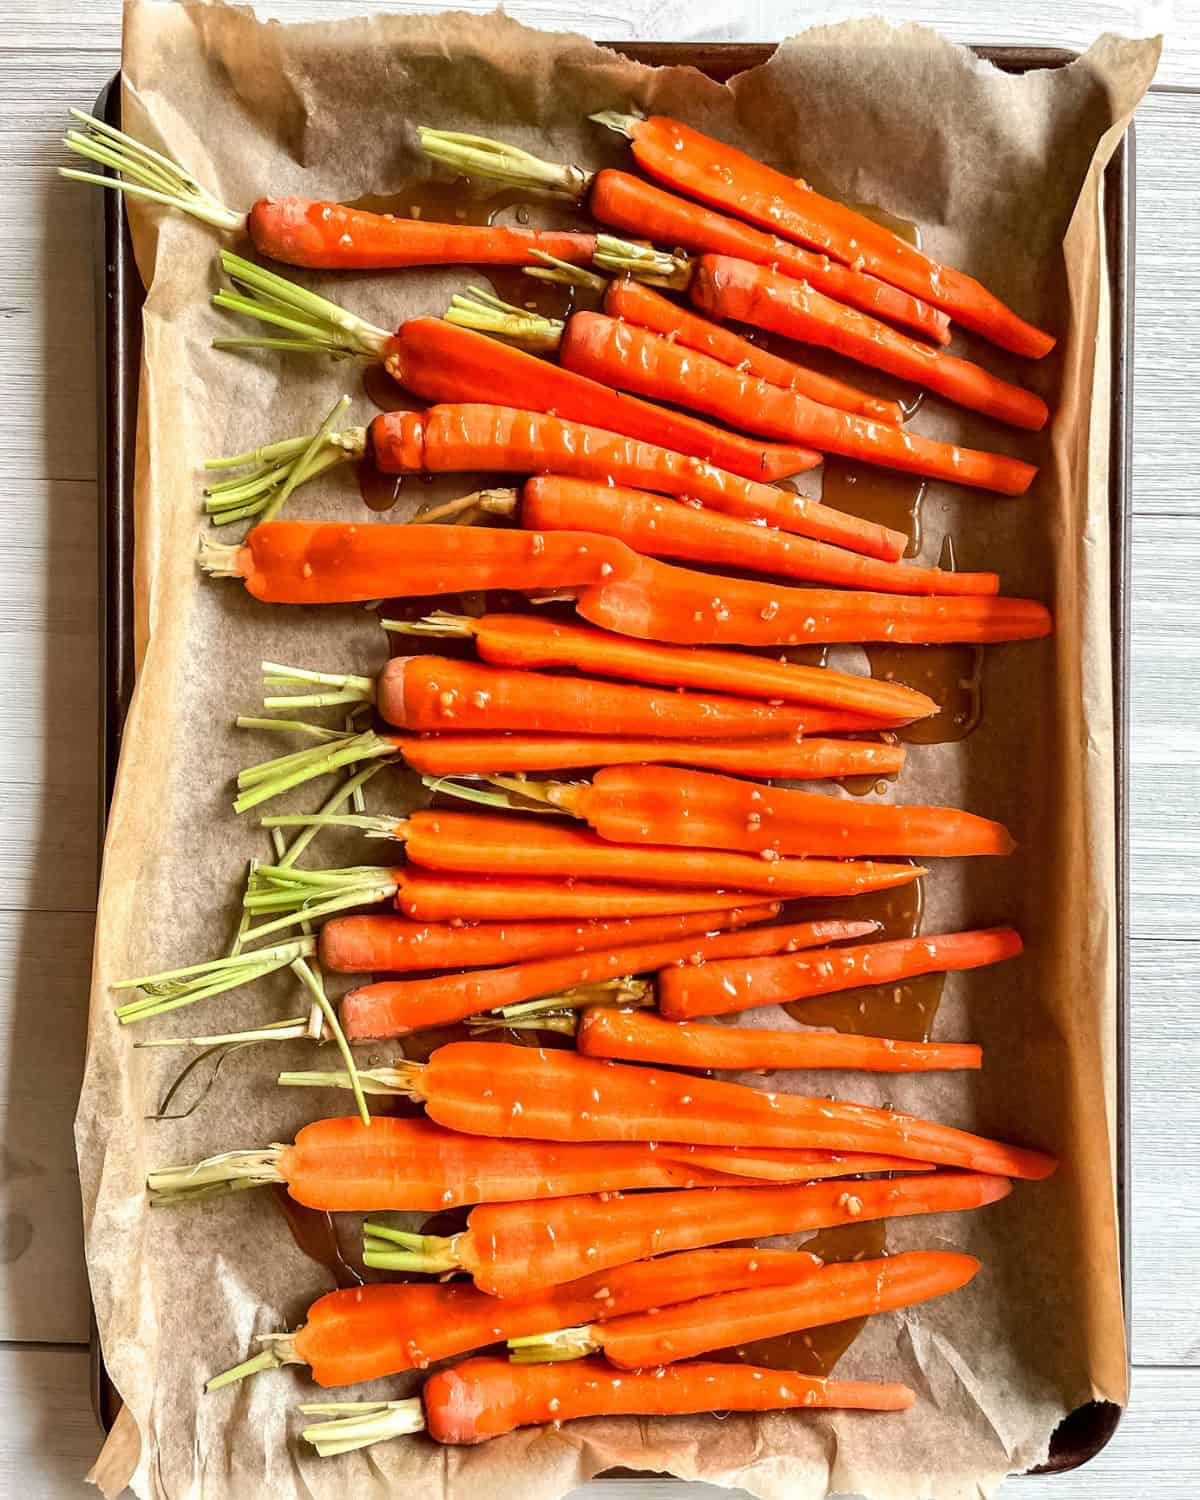 Carrots on a parchment lined baking sheet, drizzled with brown sugar glaze